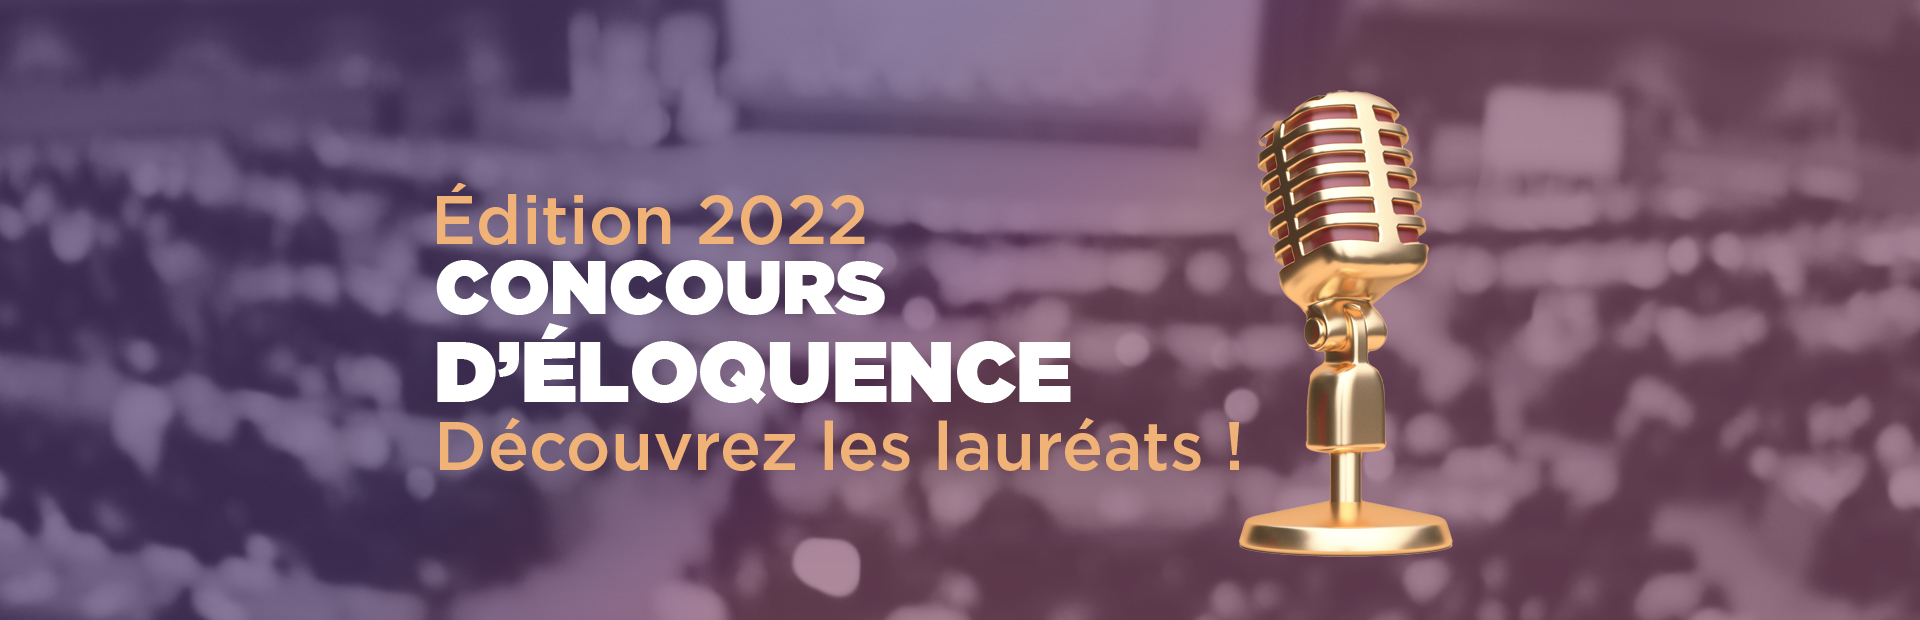 concours eloquence 2022